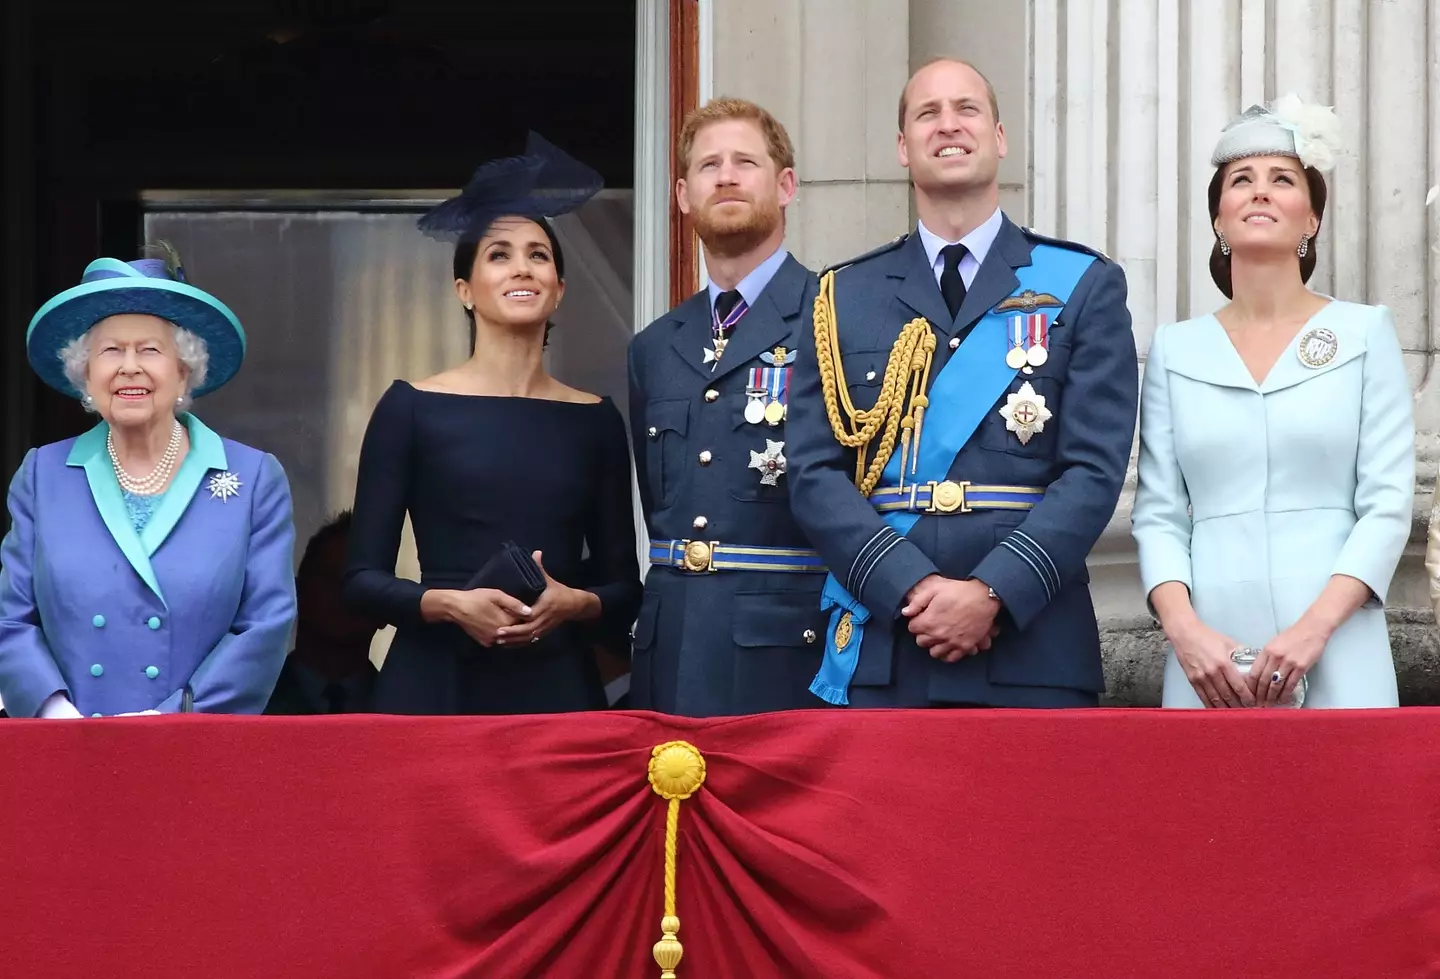 The Duke and Duchess of Sussex left their roles as senior royals back in 2020.